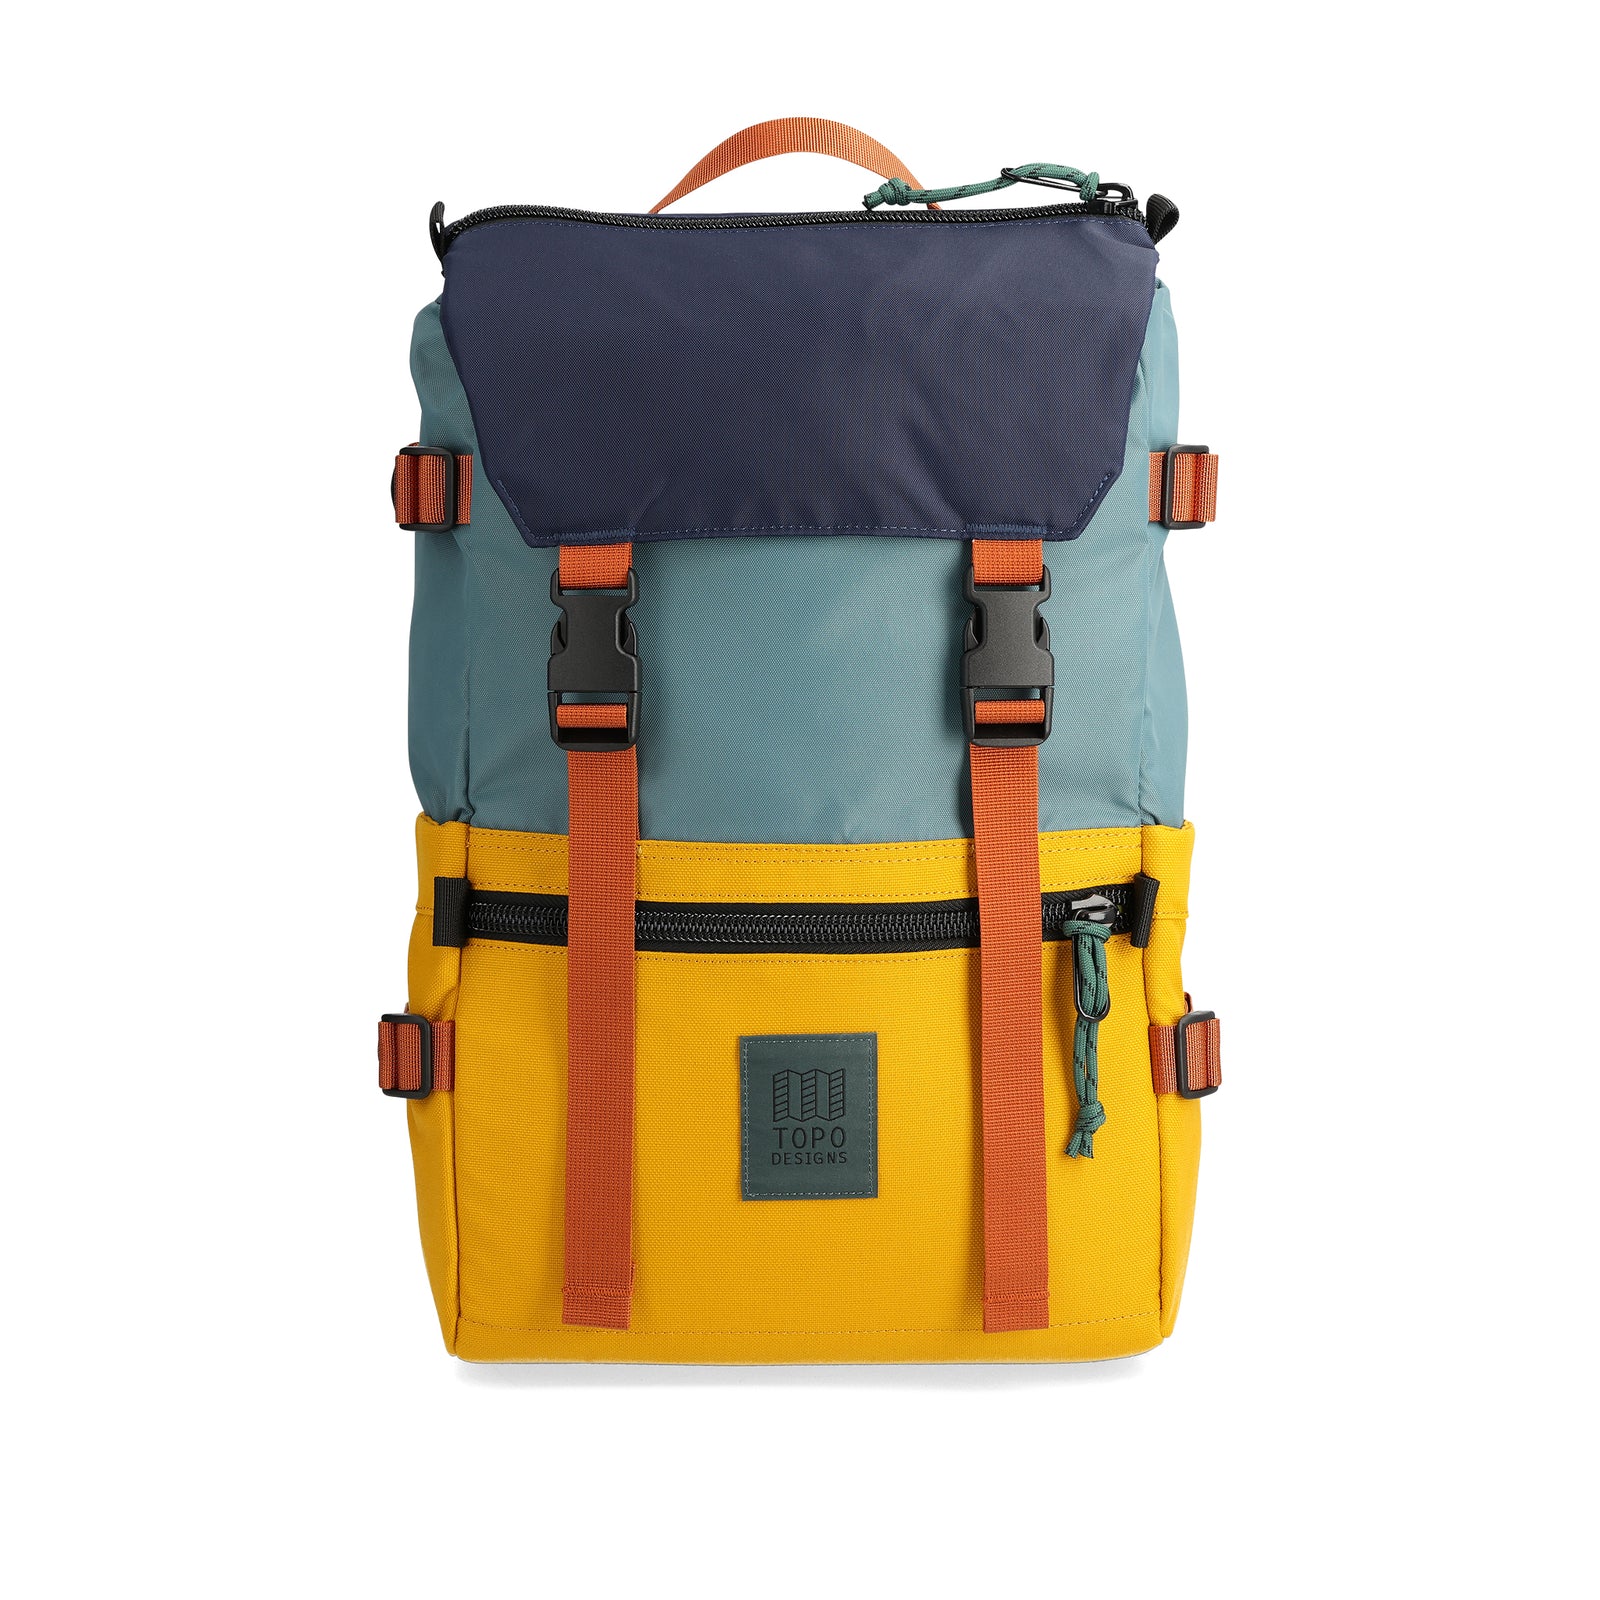 Front View of Topo Designs Rover Pack Classic in "Sea Pine / Mustard"